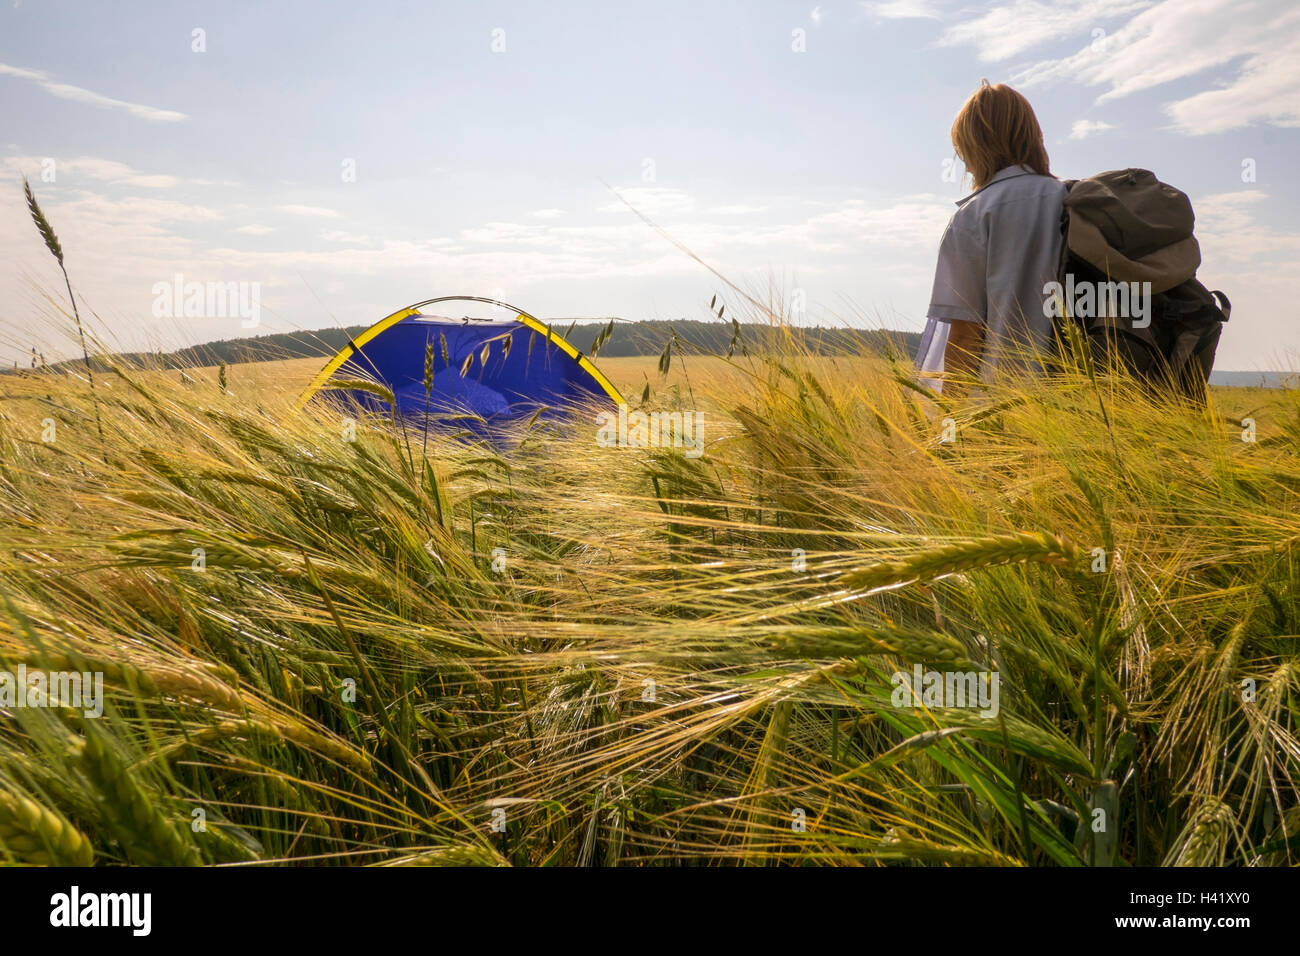 Caucasian woman standing in field near tente de camping Banque D'Images